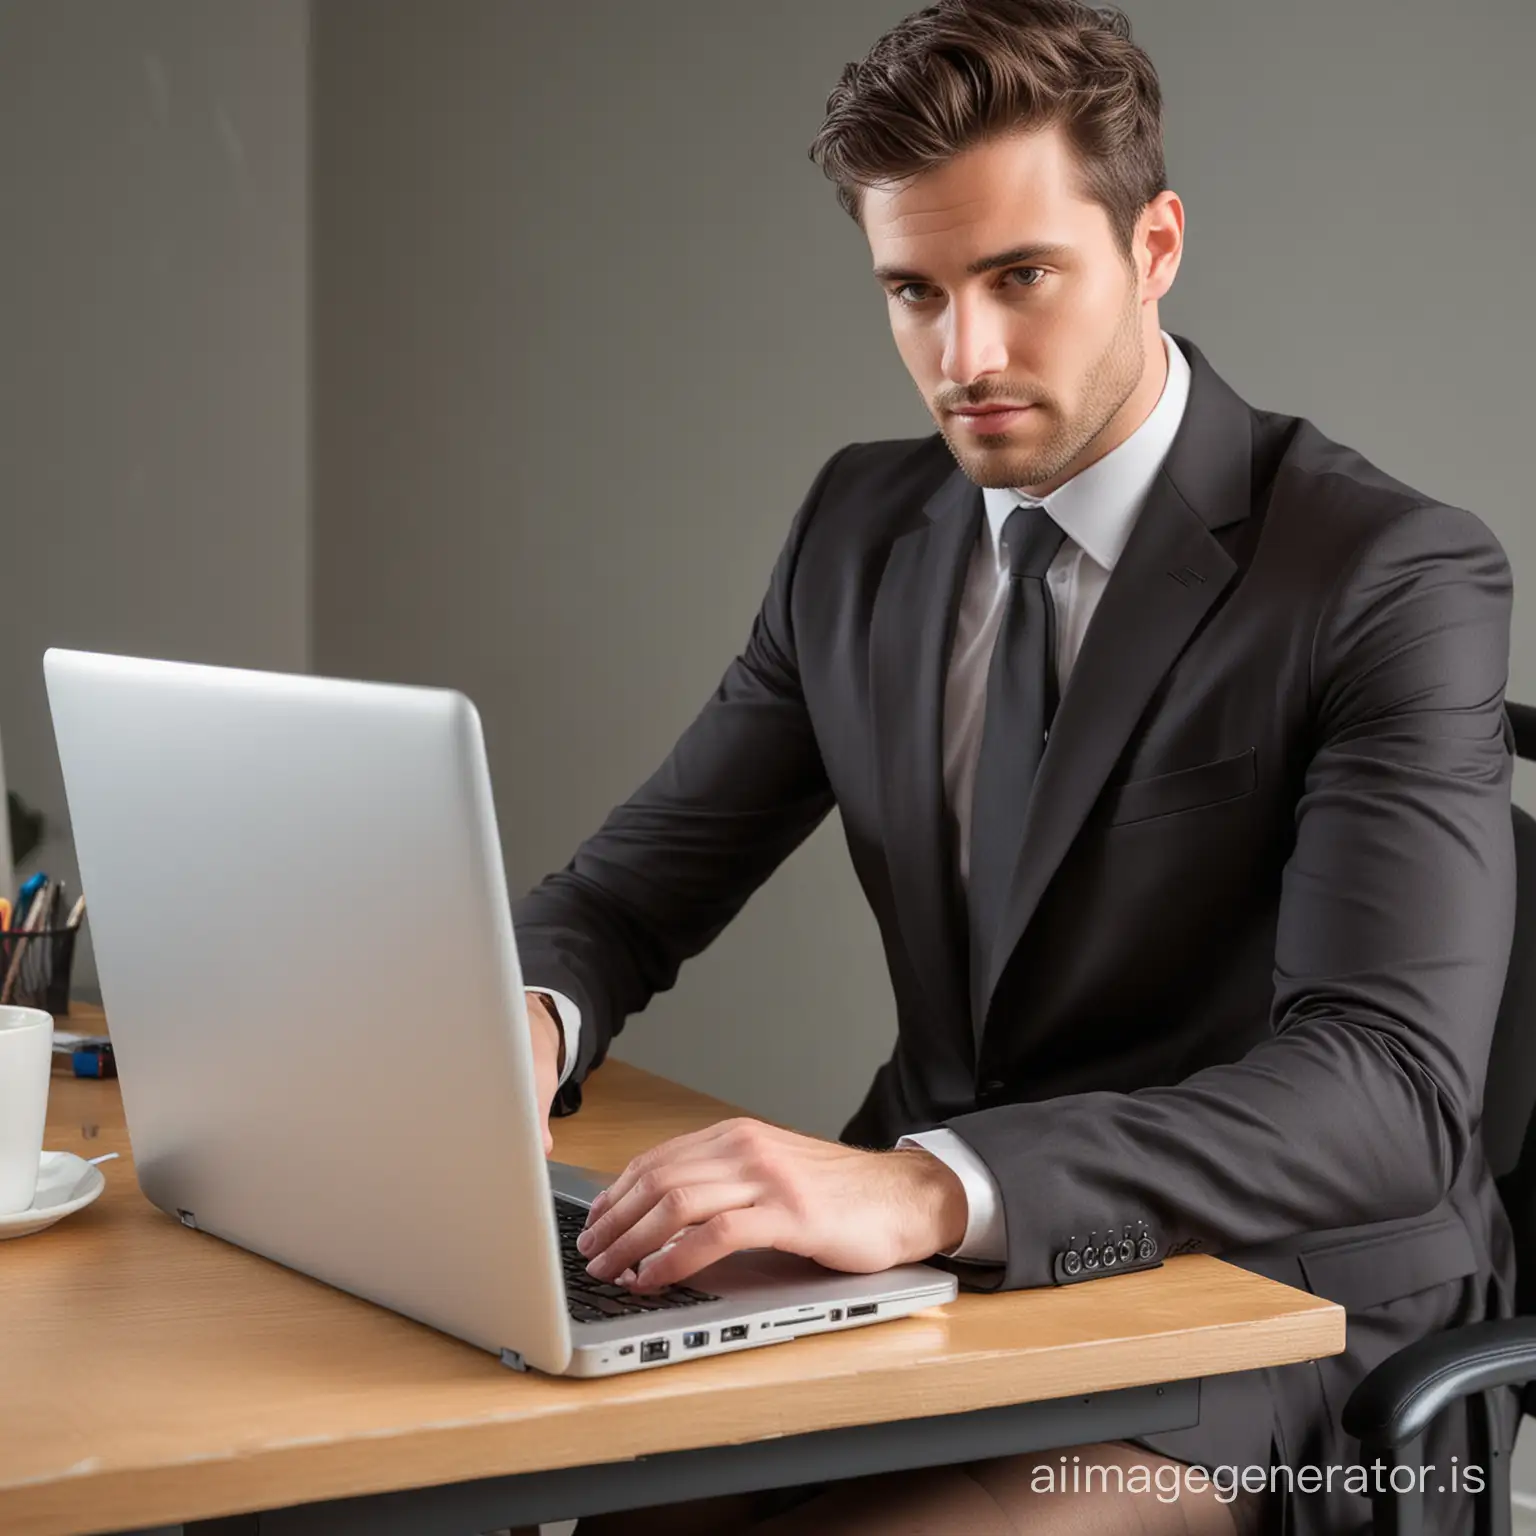 Confident-Businessman-Working-on-Laptop-at-Desk-in-Sheer-Tights